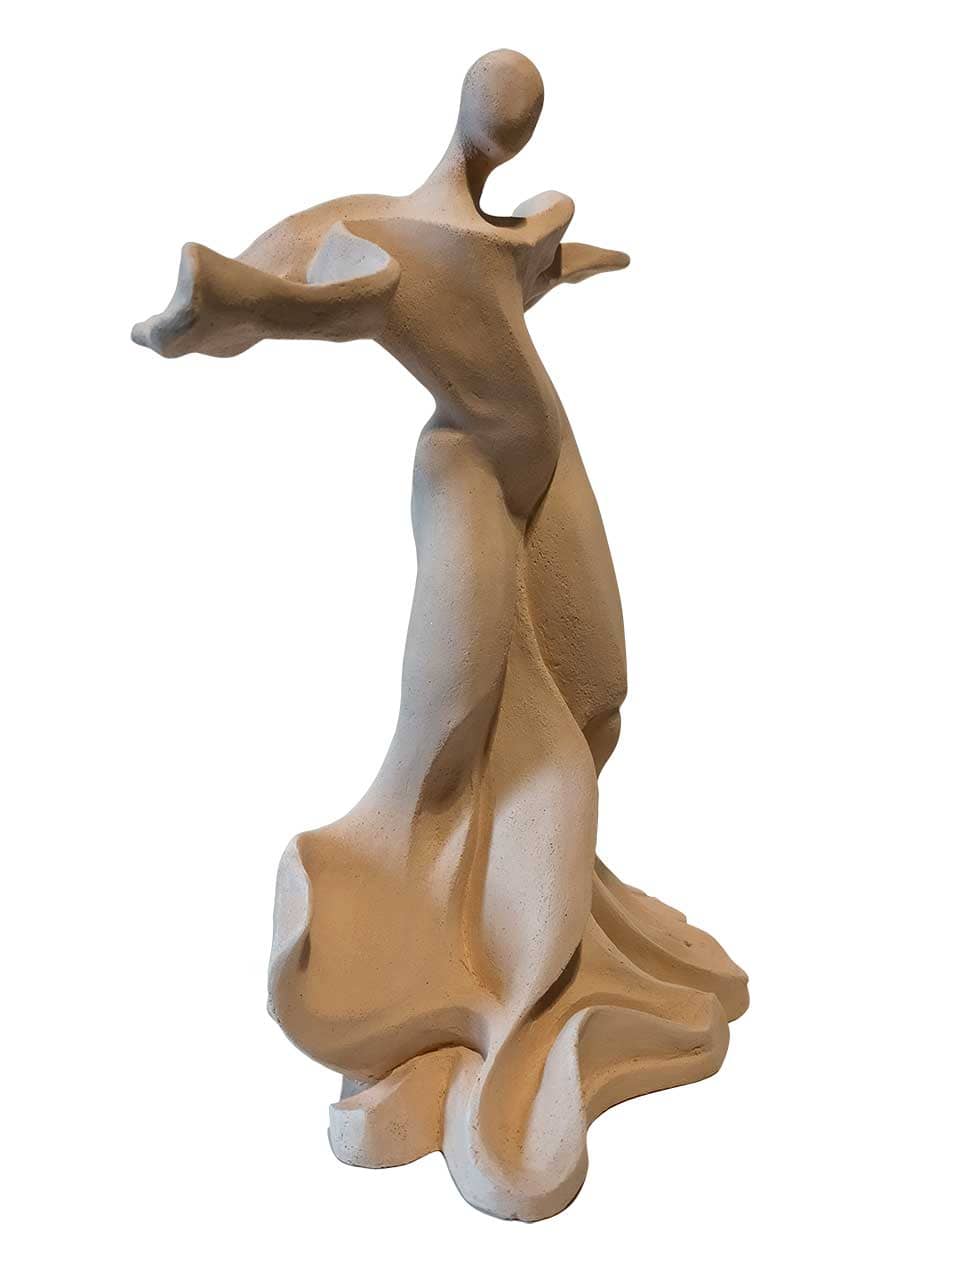 Metamorphosis 16 | Serena sculpture collection by Denise Gemin
view01